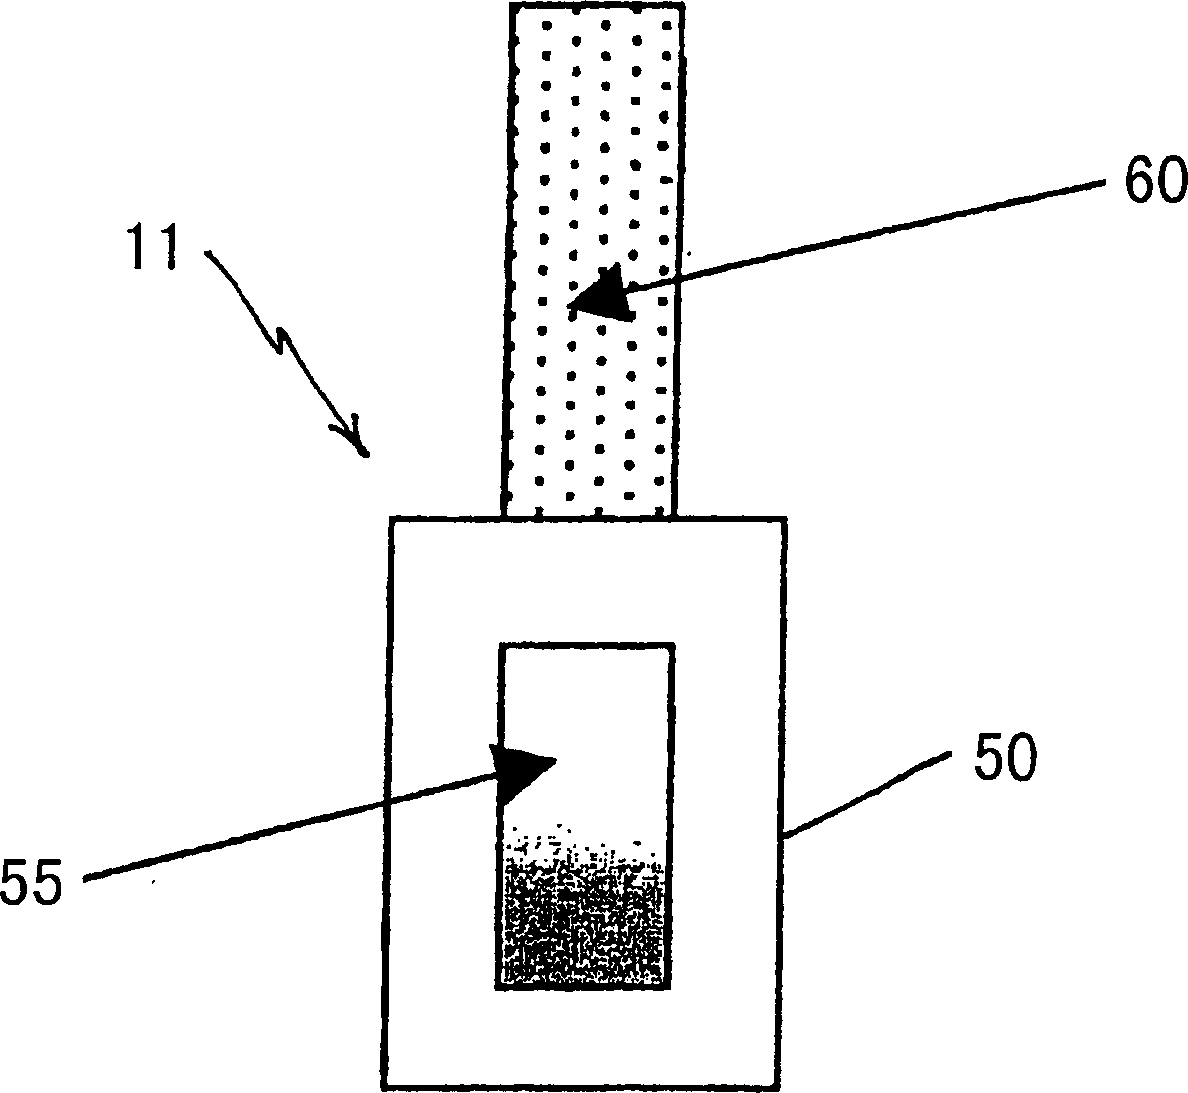 Methods & apparatus for cathode plate production